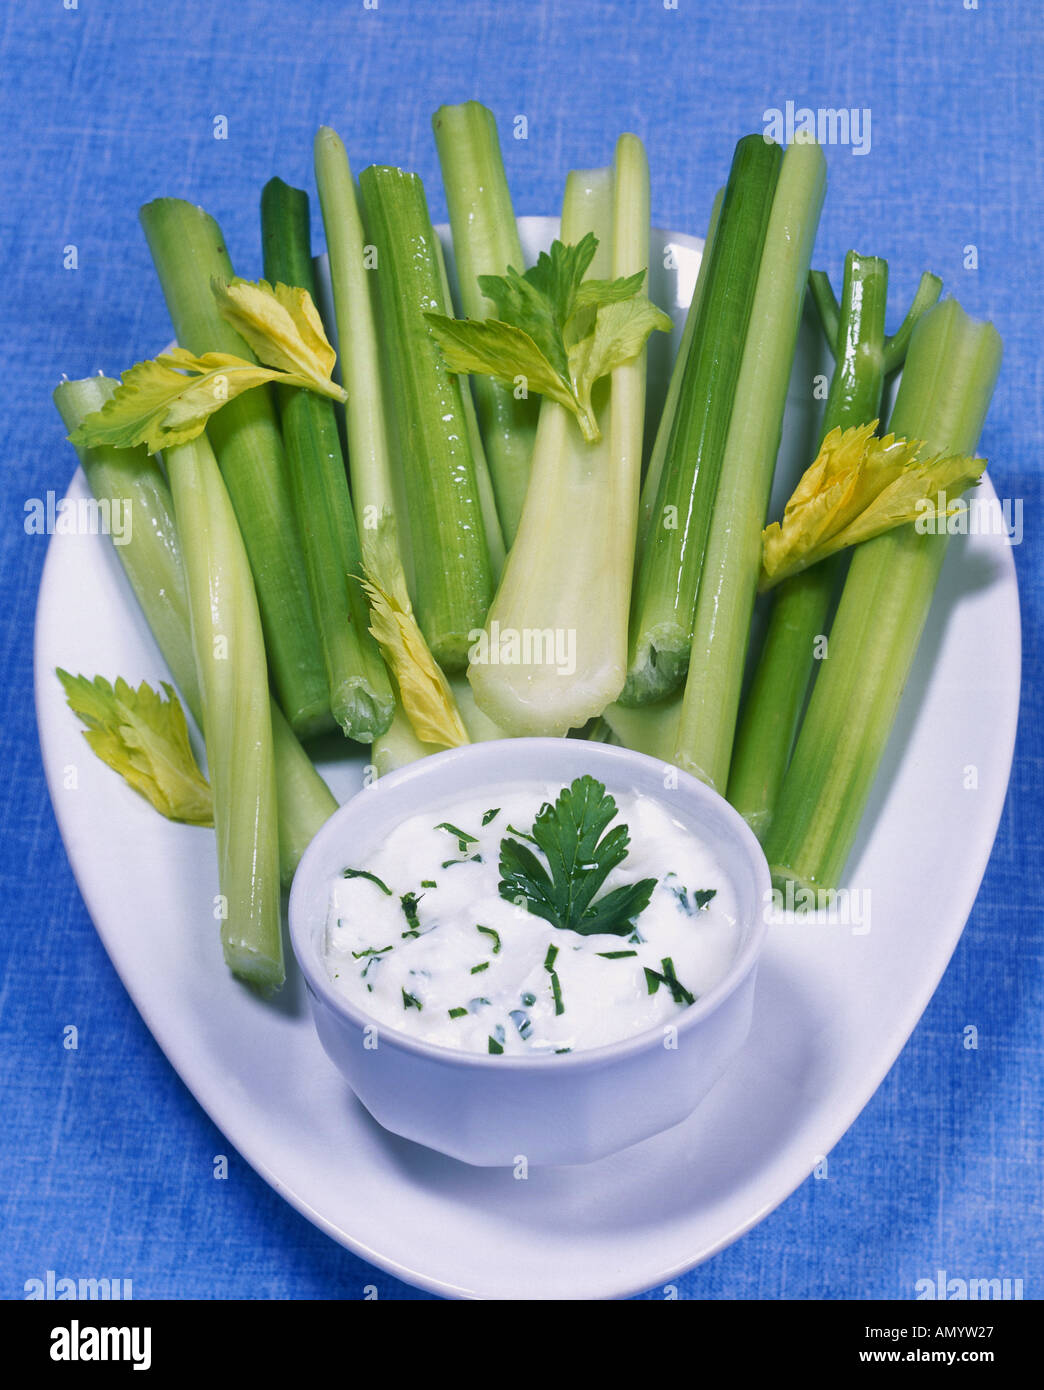 Petiolate Celery With Cottage Cheese Dip Stock Photo 5016870 Alamy